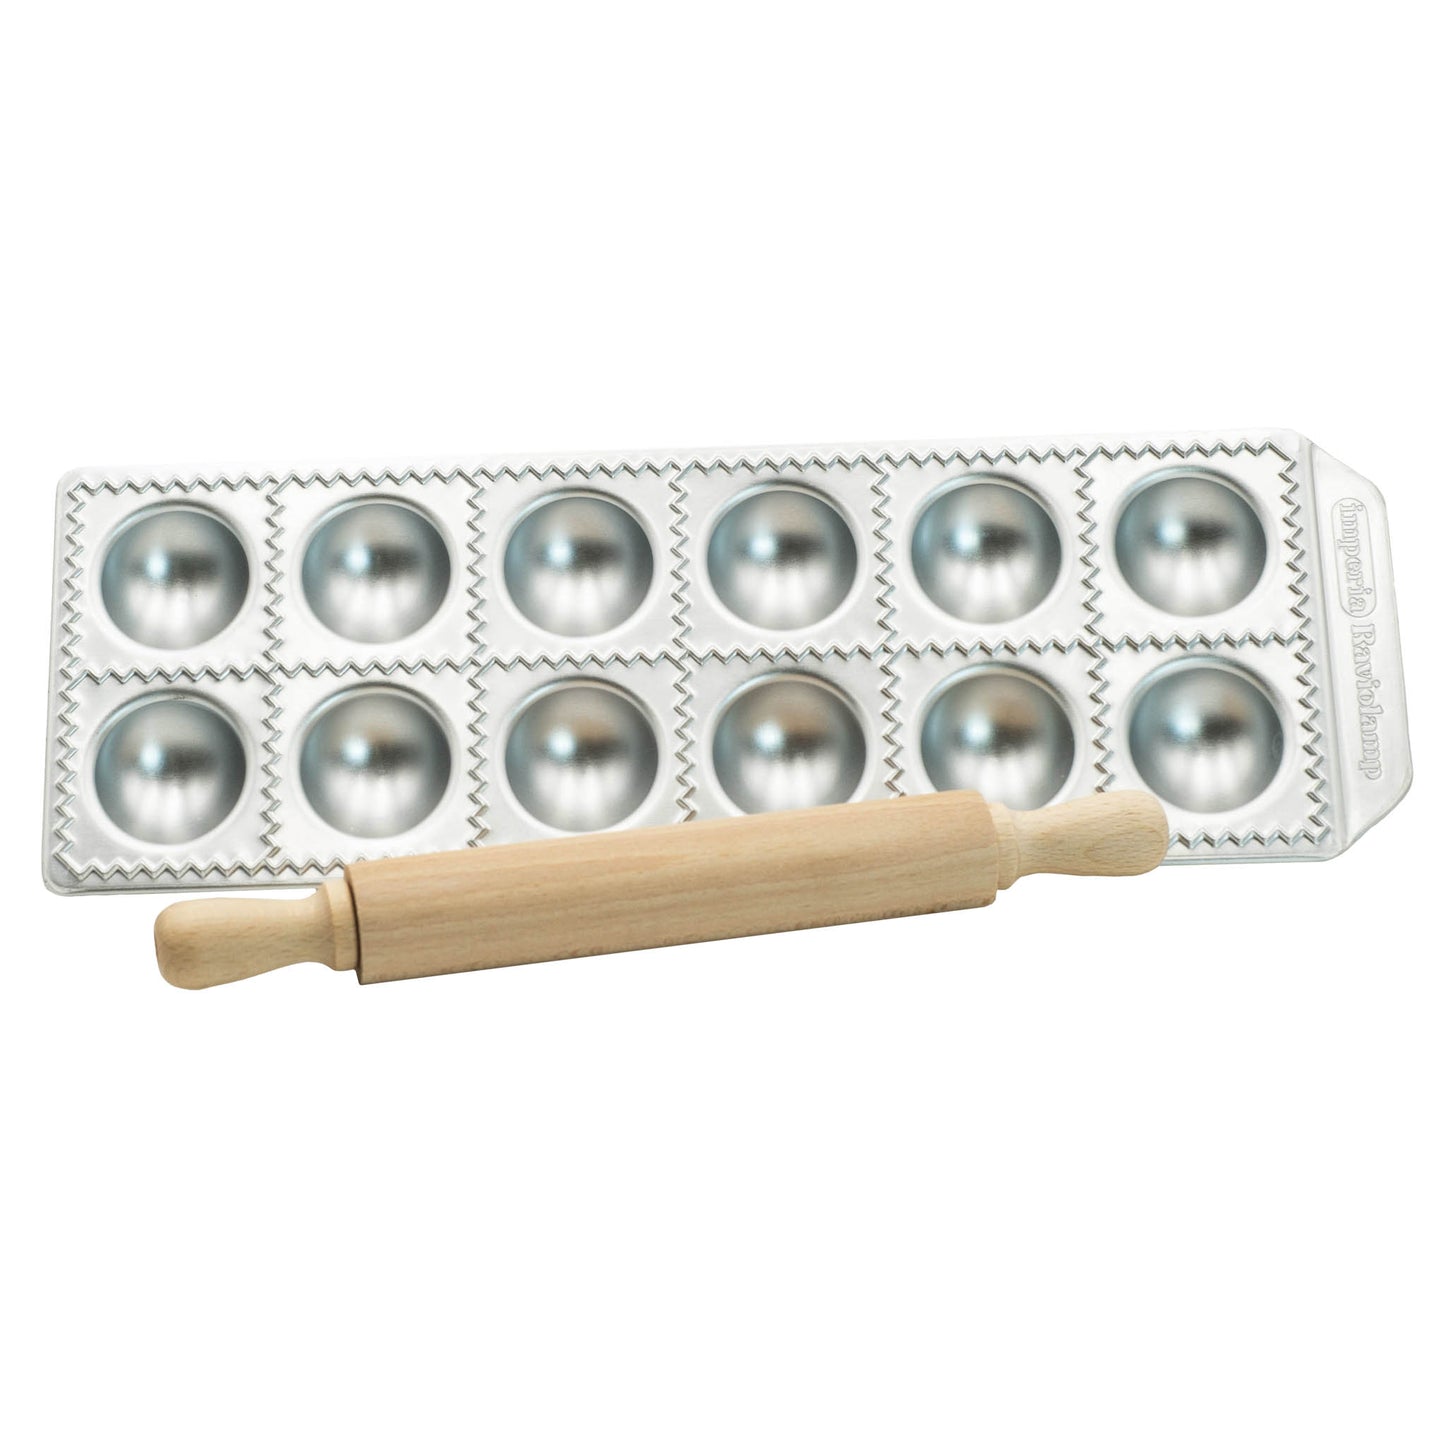 Imperia Ravioli mould with 12 large holes and a wooden rolling pin. 